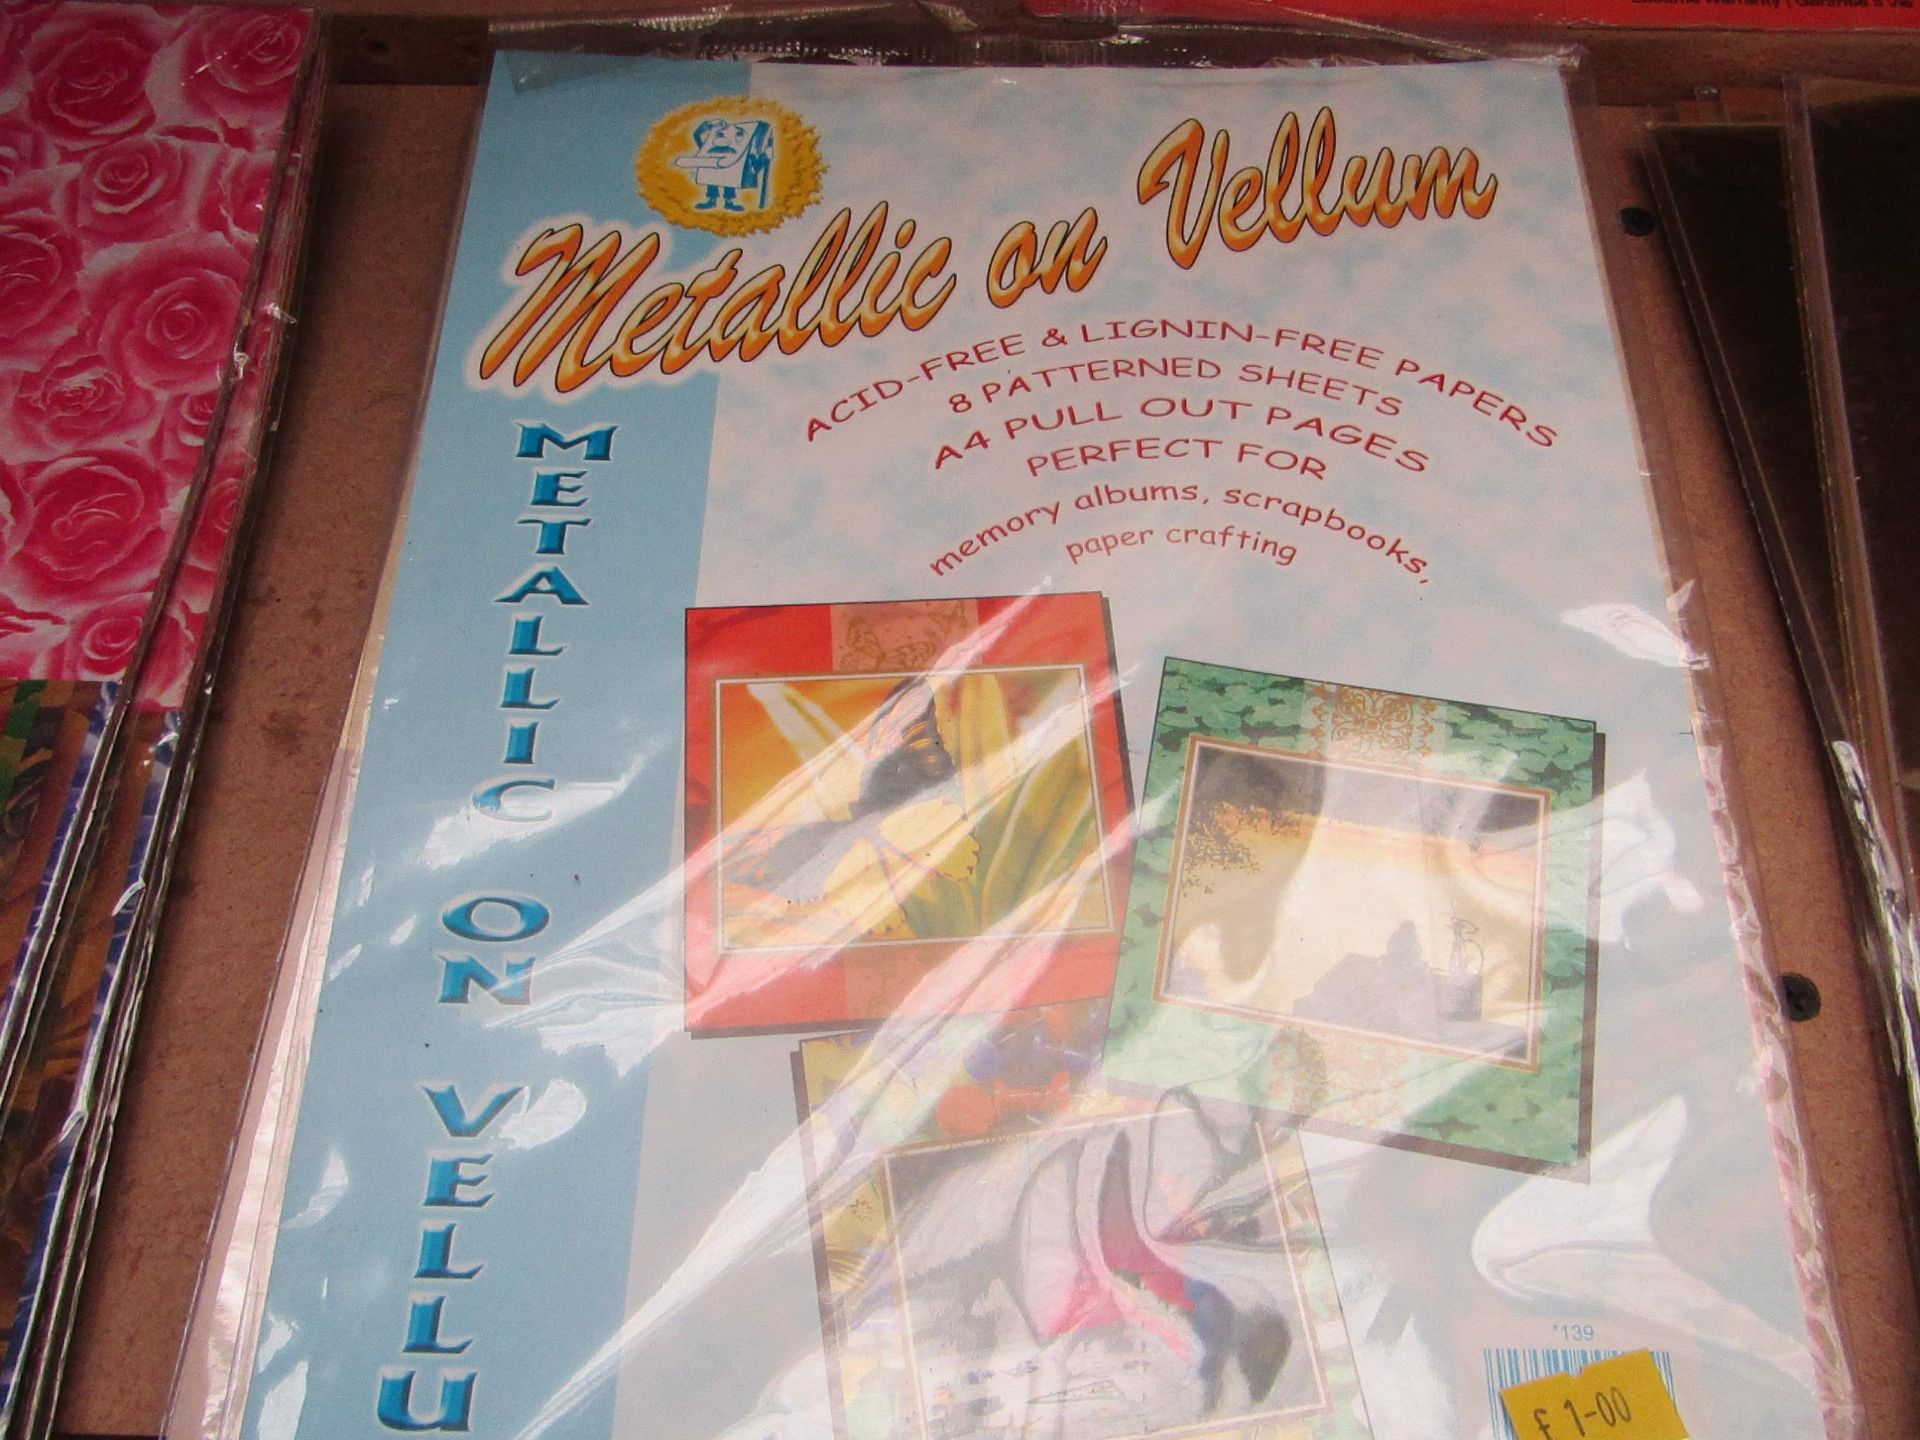 Metallic on Vellum ( 8 Patterned Sheets - A4) - All New & Packaged.